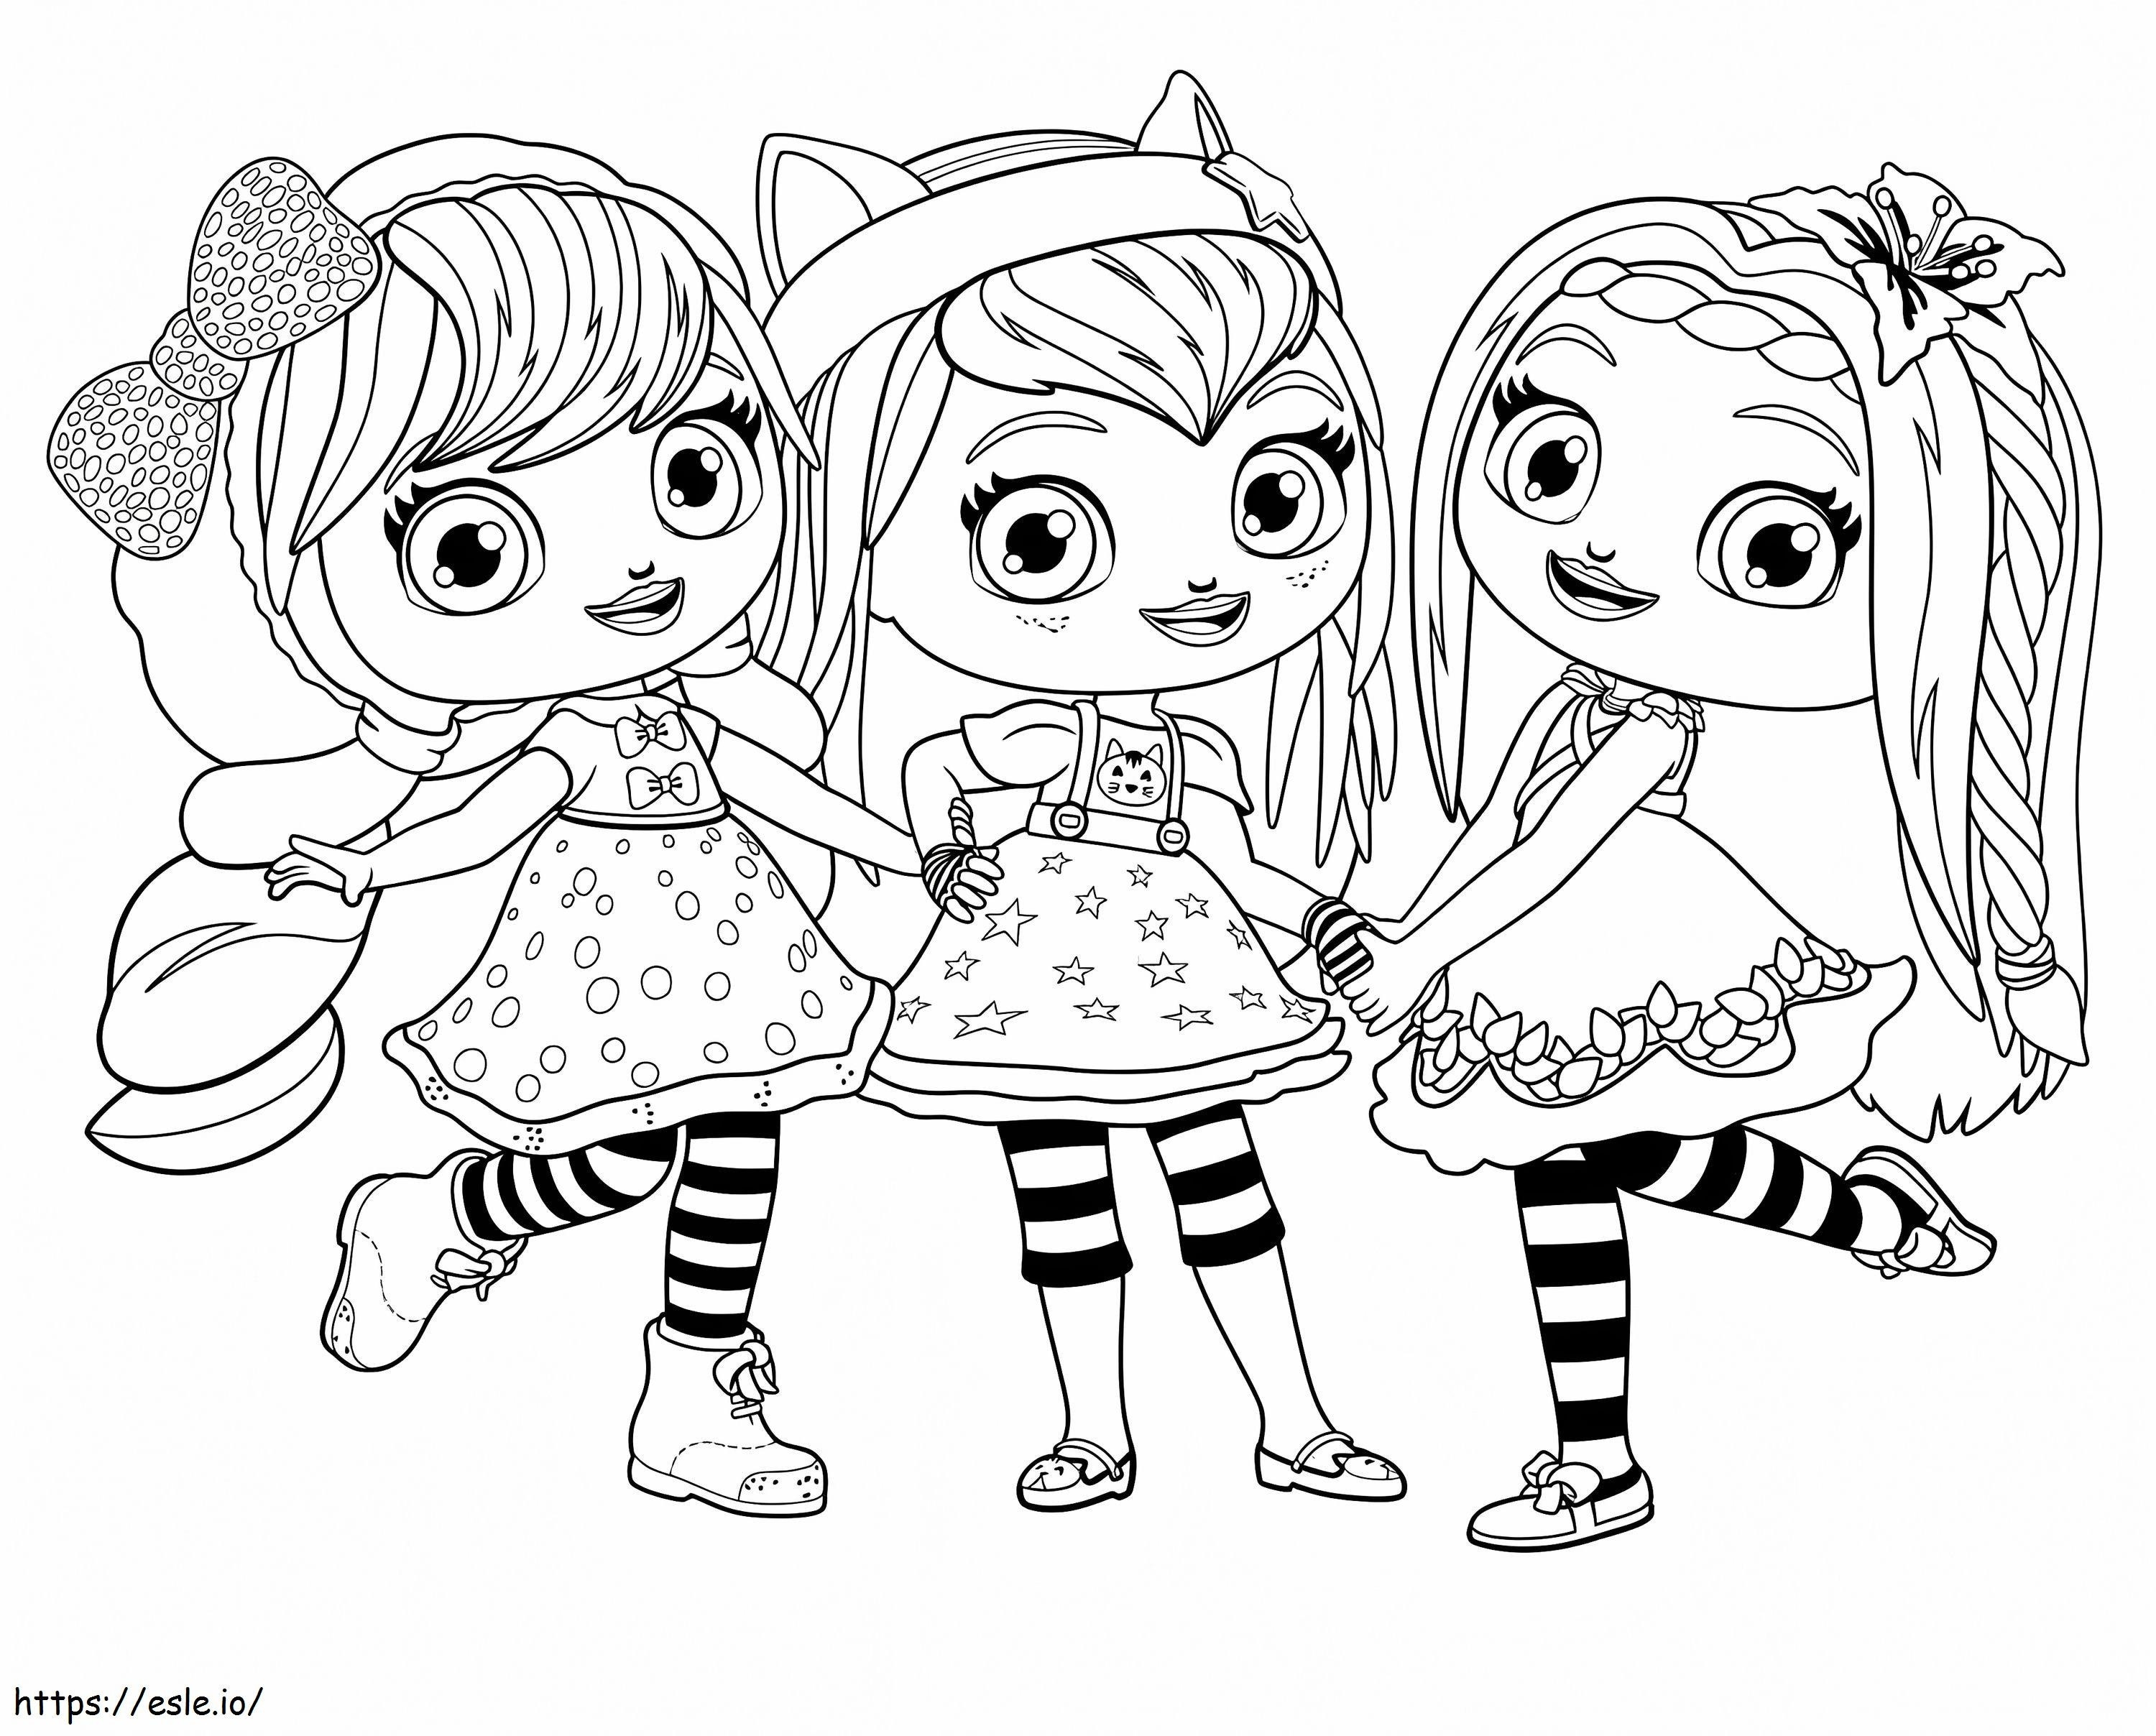 Happy Little Charmers coloring page